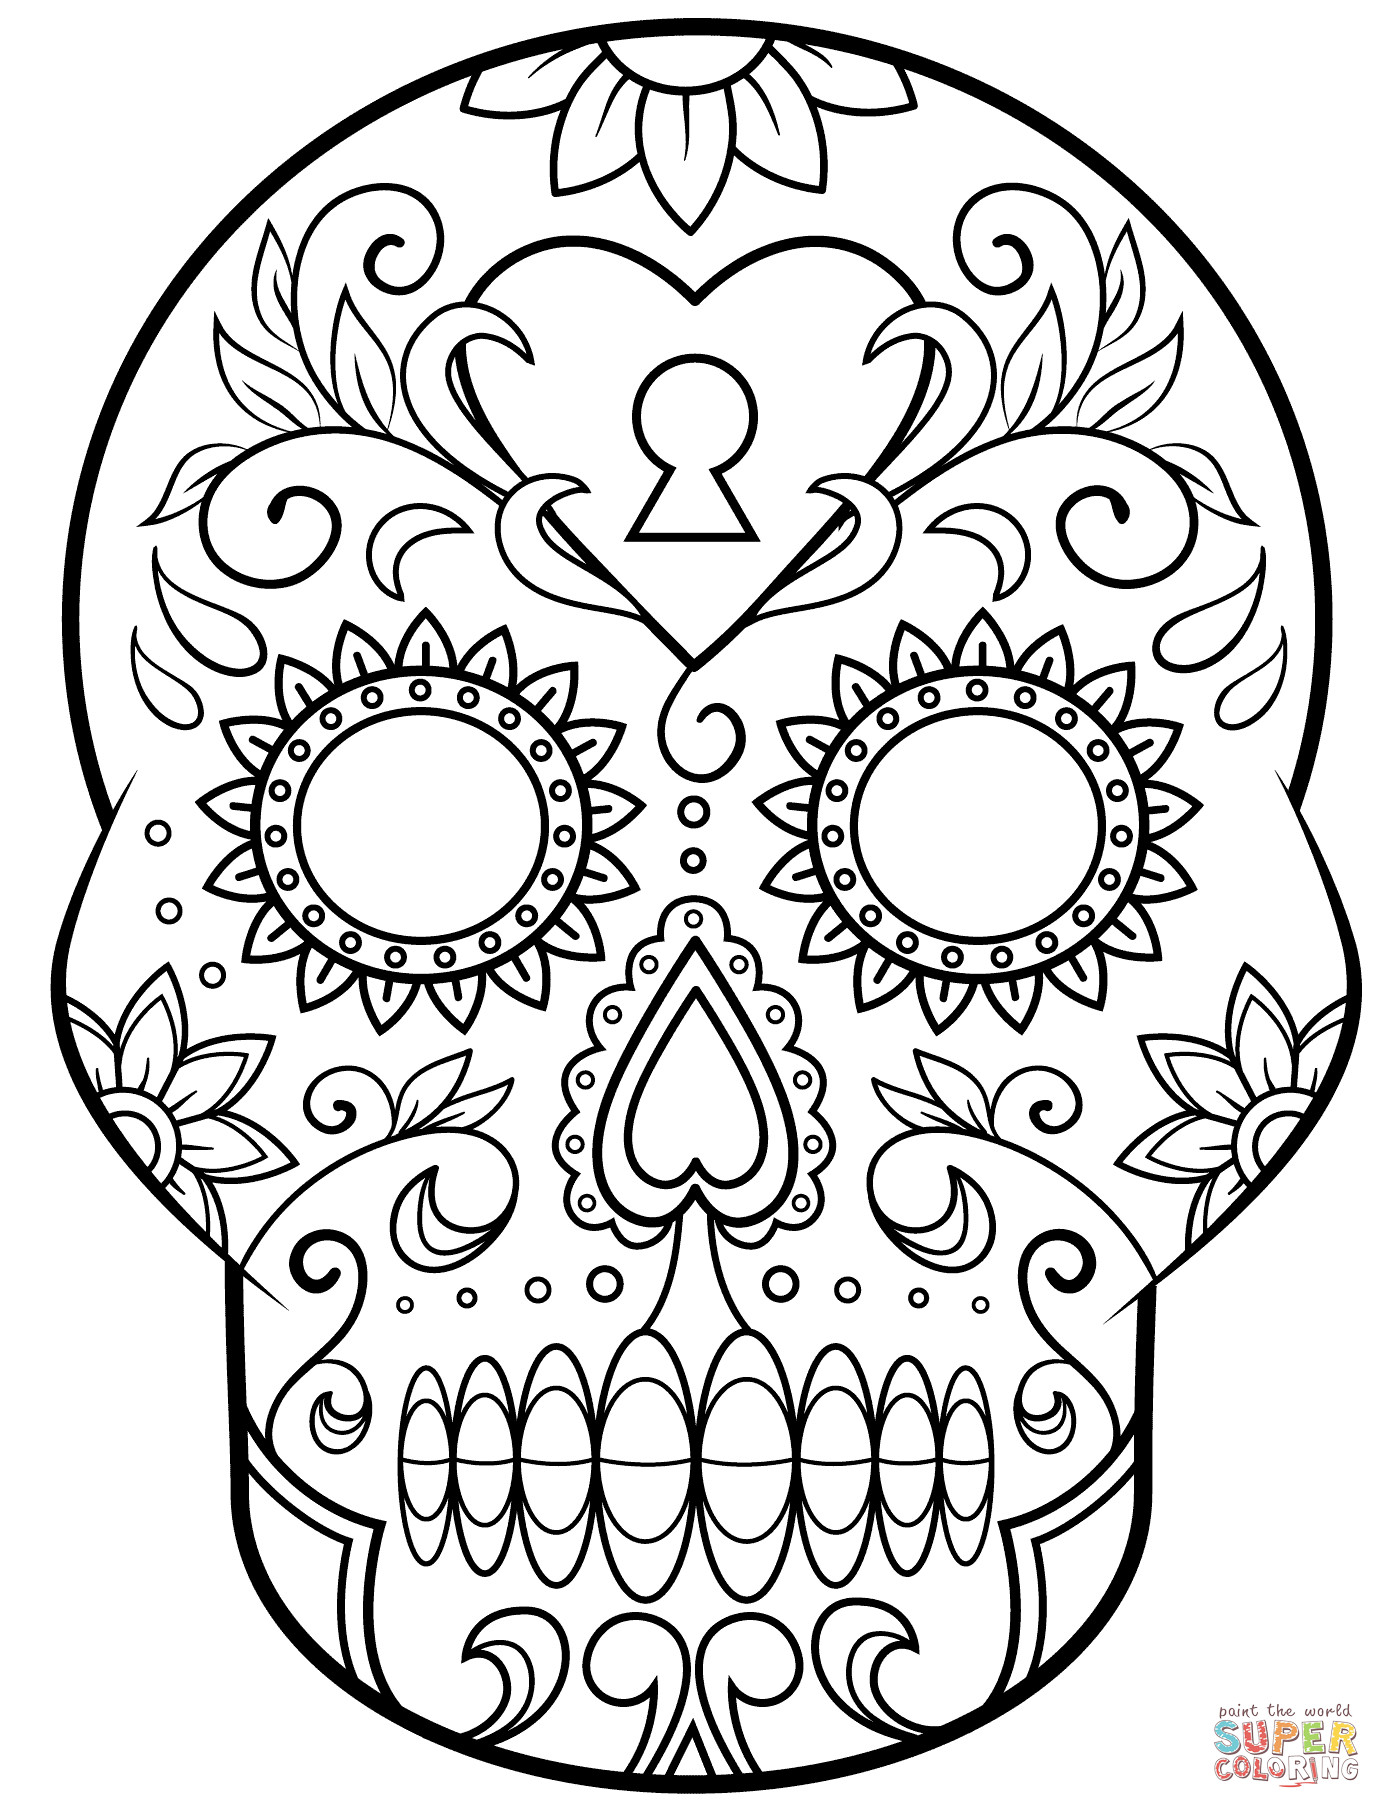 Day Of The Dead Coloring Book
 Day of the Dead Sugar Skull coloring page